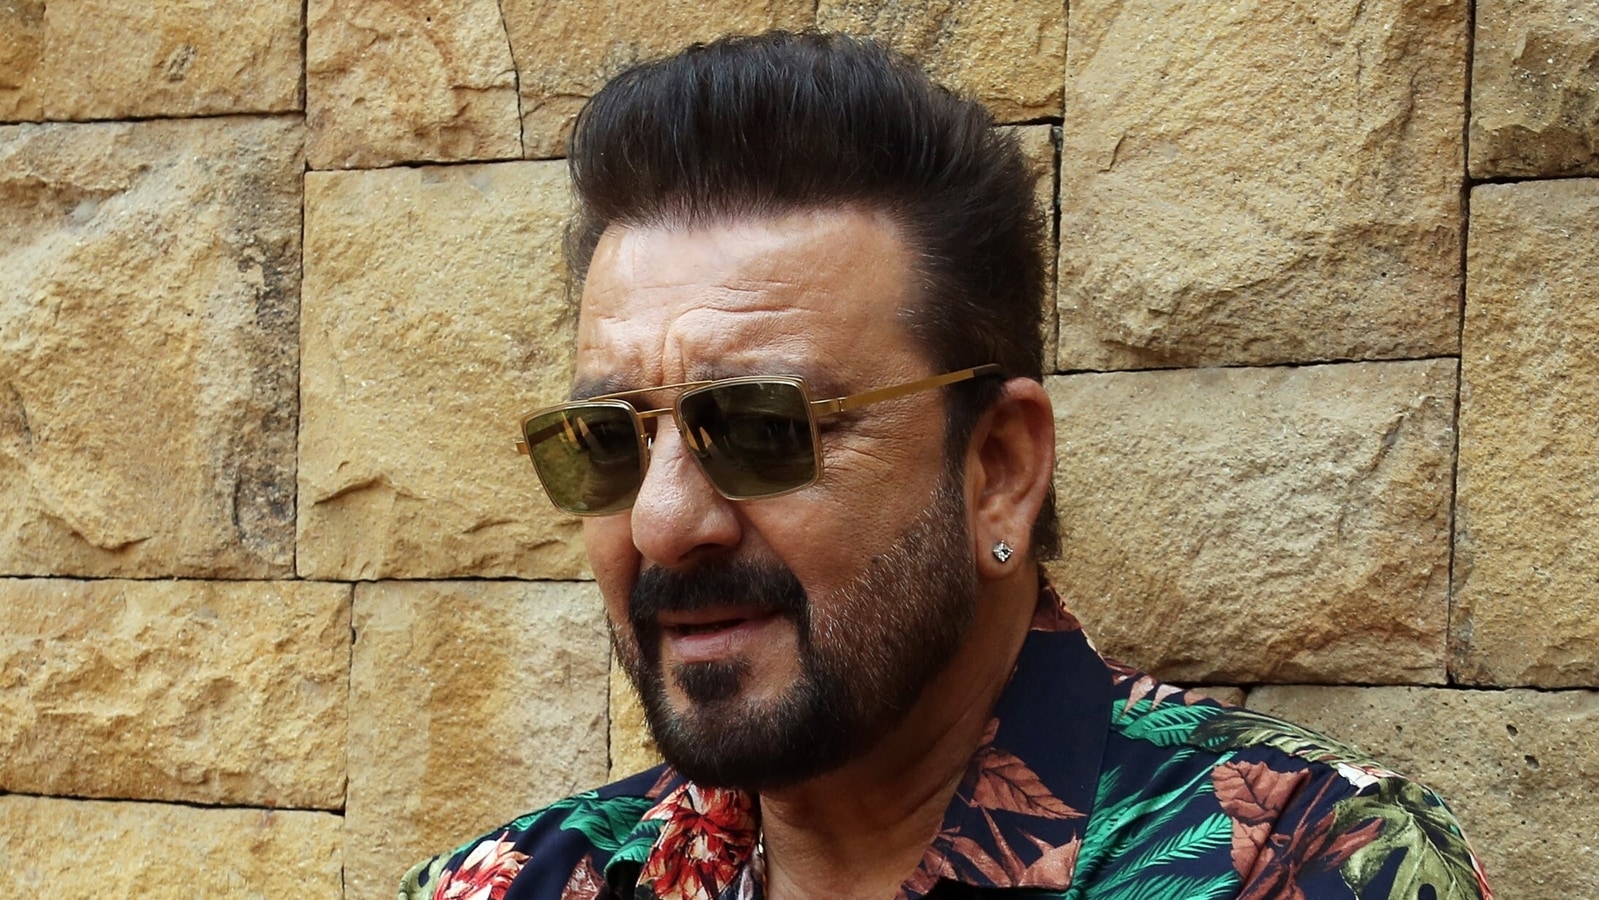 Sanjay Dutt says he started doing drugs for attention from women, people called him ‘charsi’ after rehab